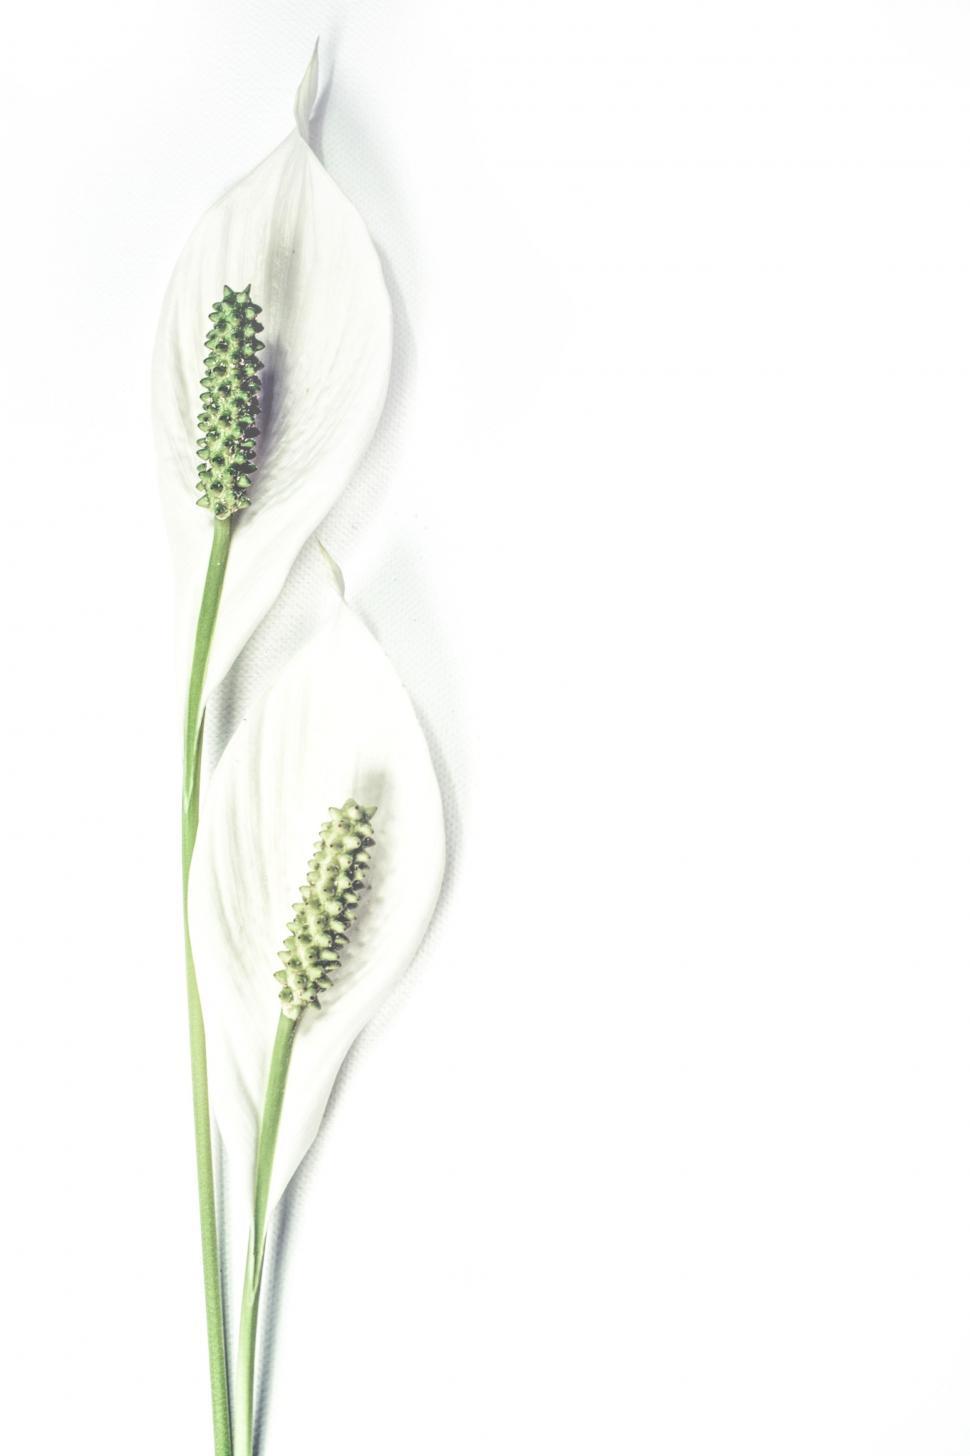 Free Image of White Lily Flowers  